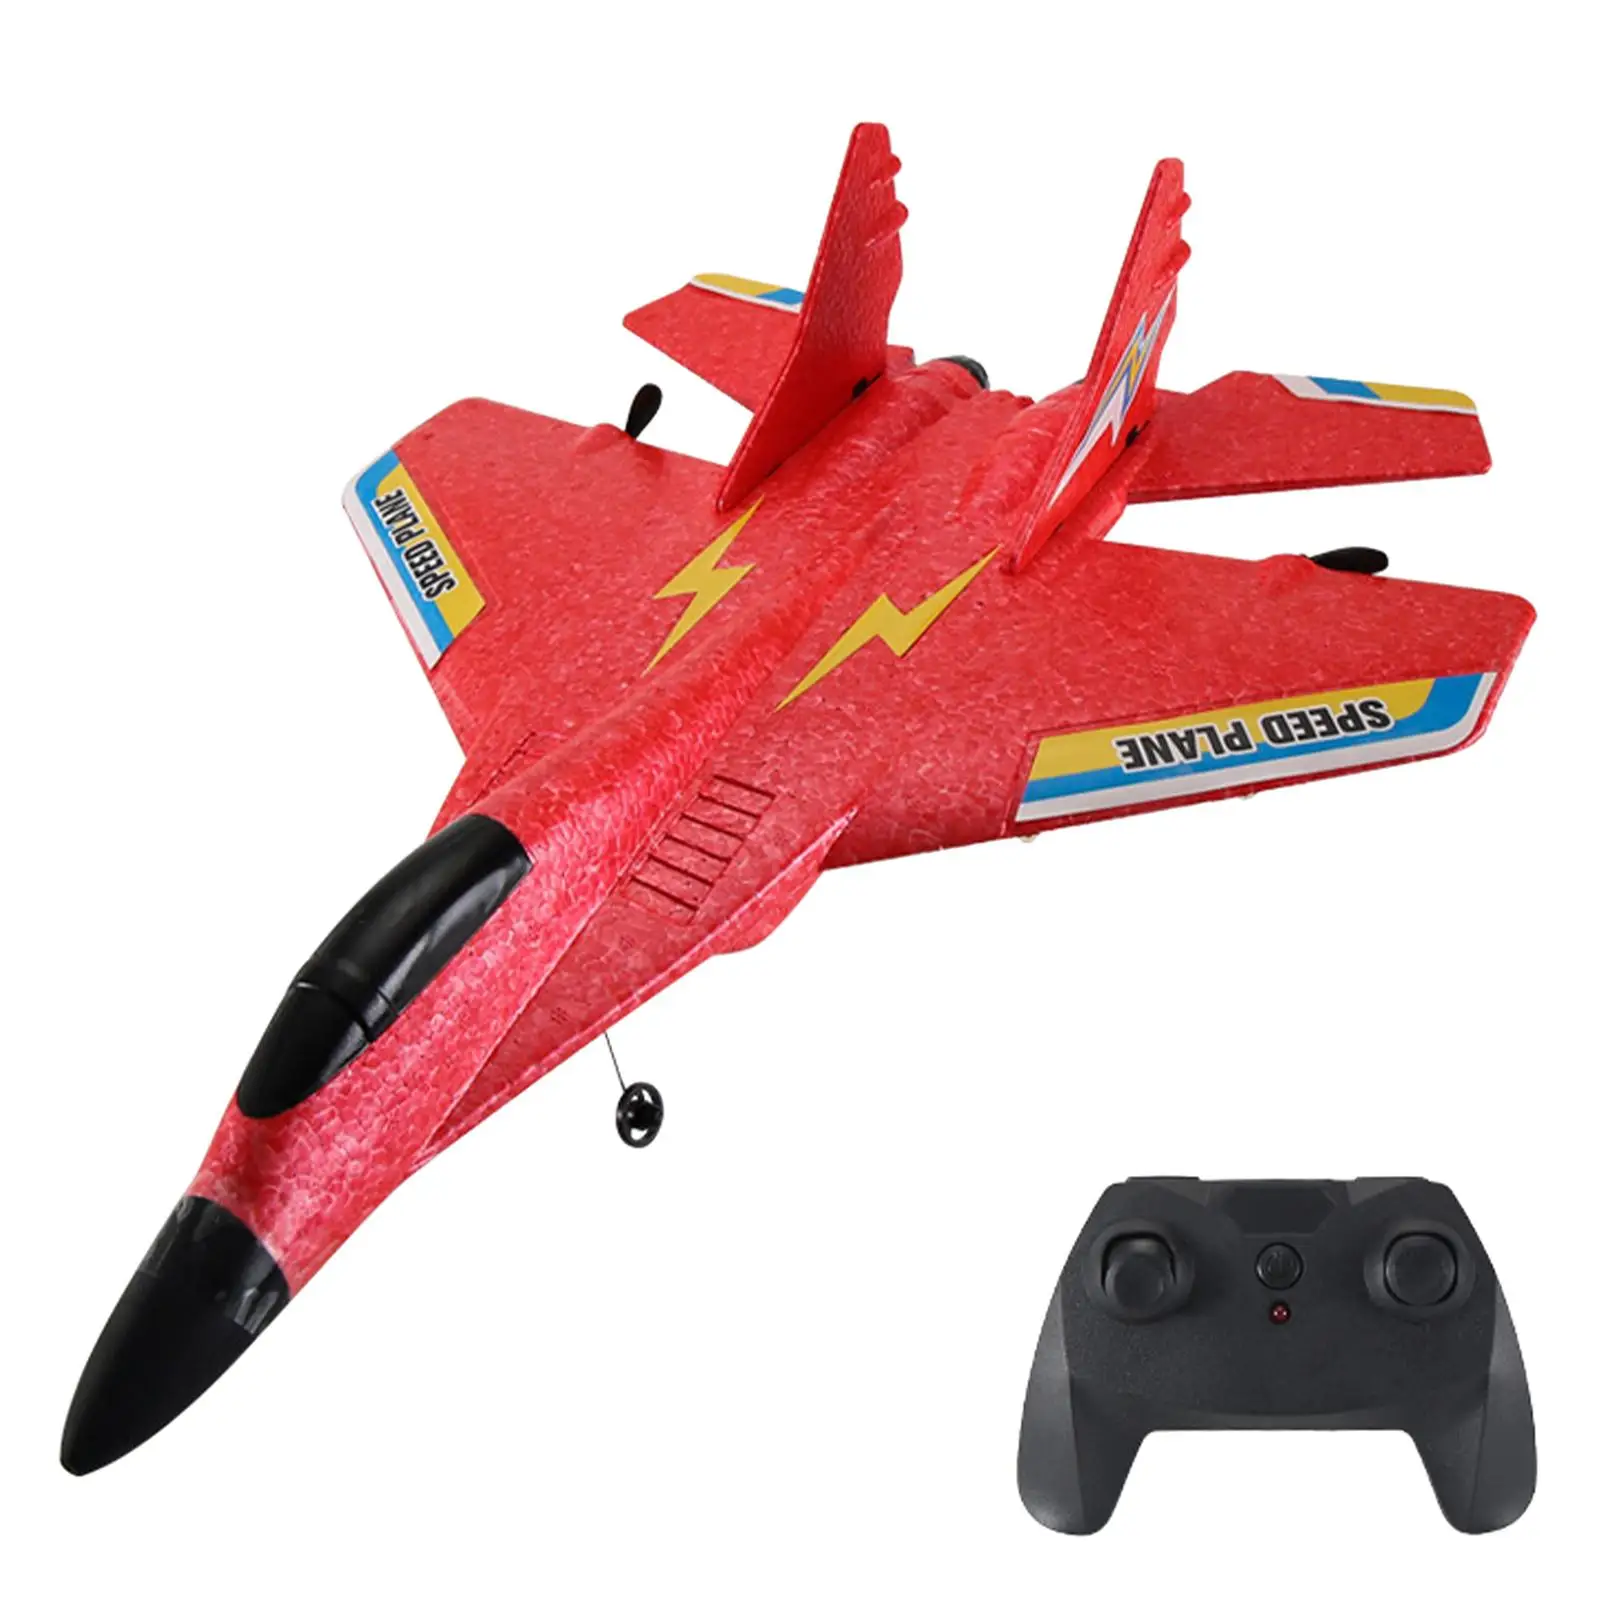  2CH Remote Control  Mig 530  EPP Foam for Children Ready  Christmas Gifts Indoor Fixed Wing Small Size